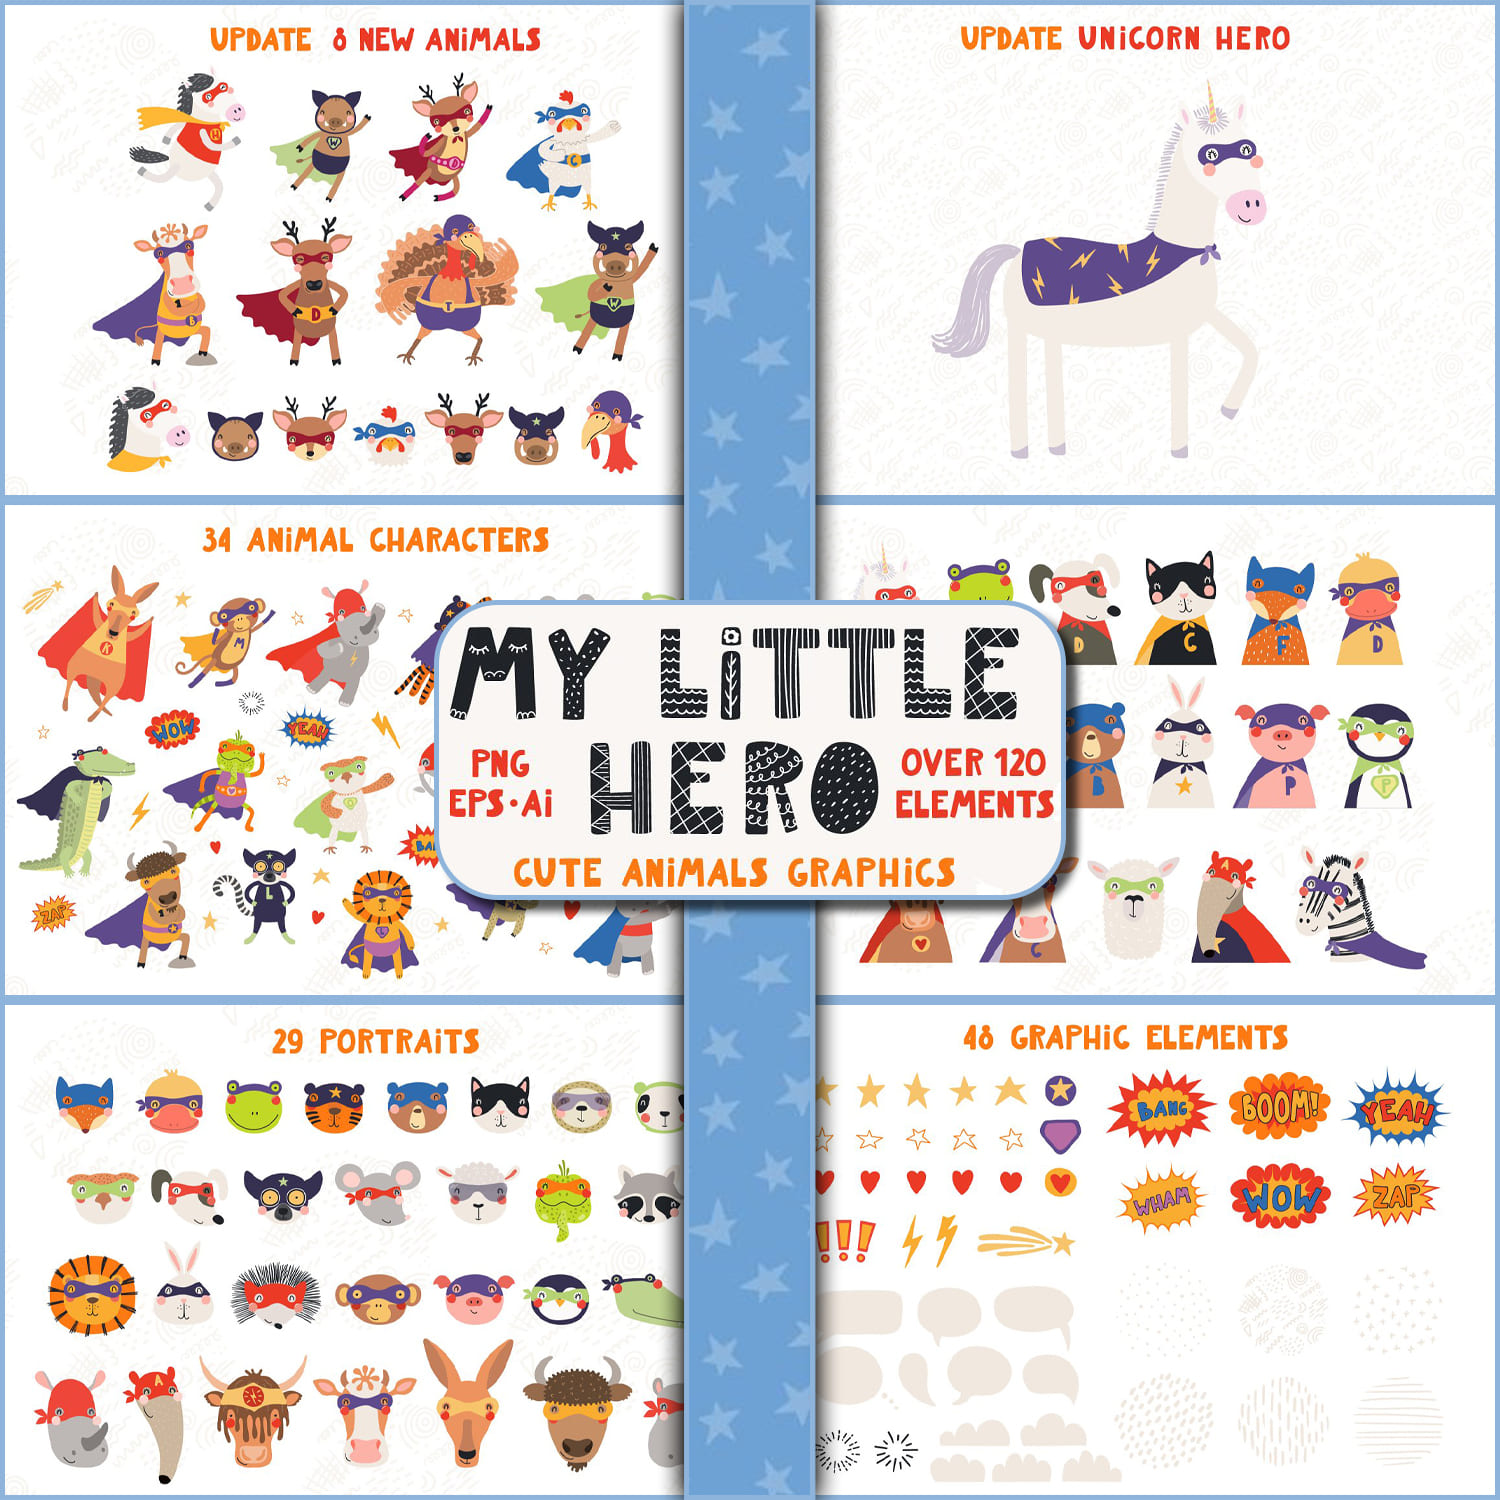 My Little Hero, Cute Animal Graphics cover.